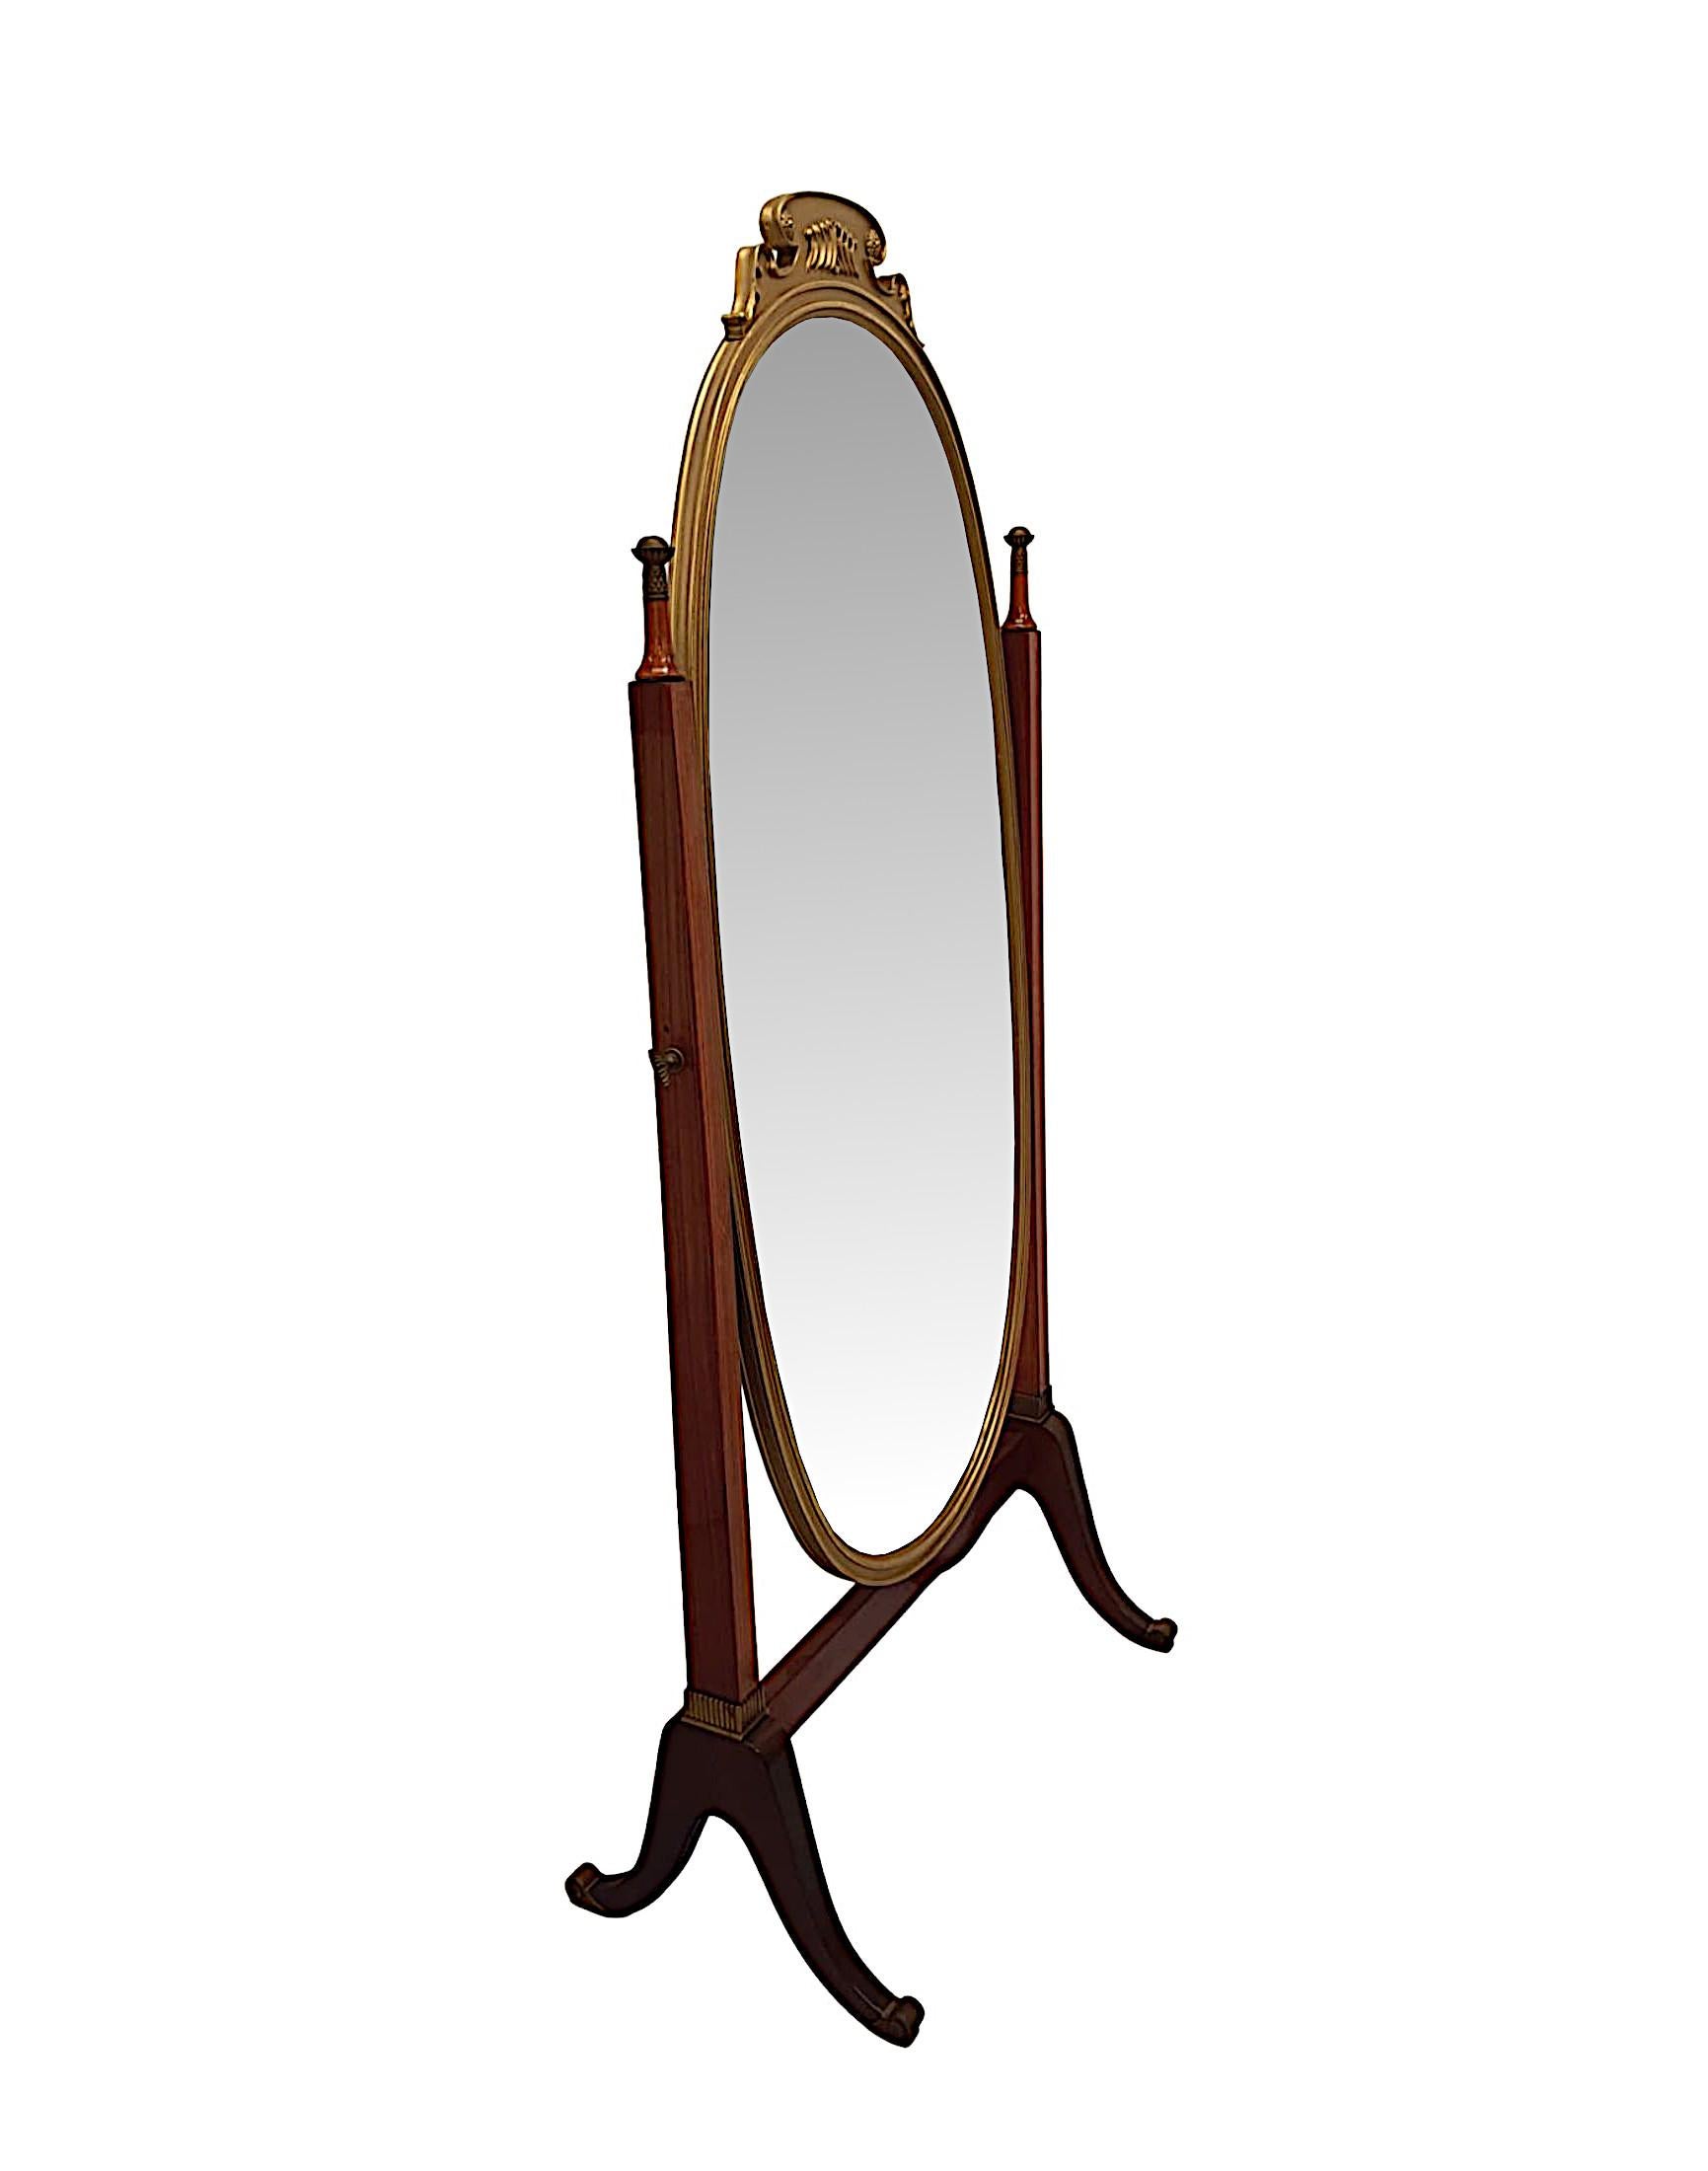 A very fine and unusual Edwardian fruitwood and giltwood framed cheval mirror, of exceptional quality, fabulously carved and line inlaid throughout with gorgeously rich patination and grain. The bevelled mirror glass plate of oval form is set within